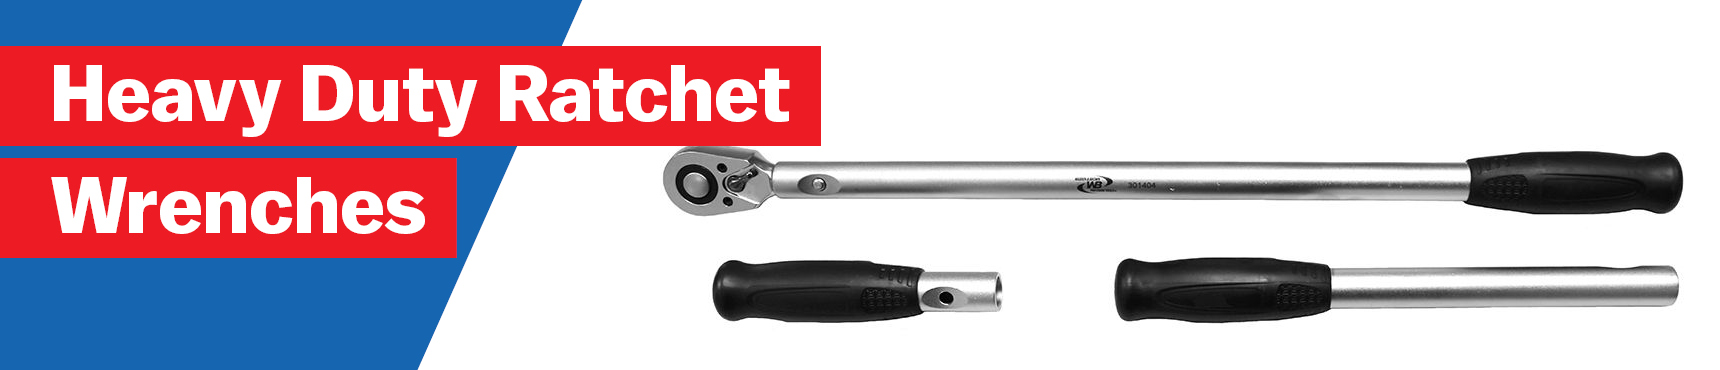 Heavy Duty Ratchet Wrenches